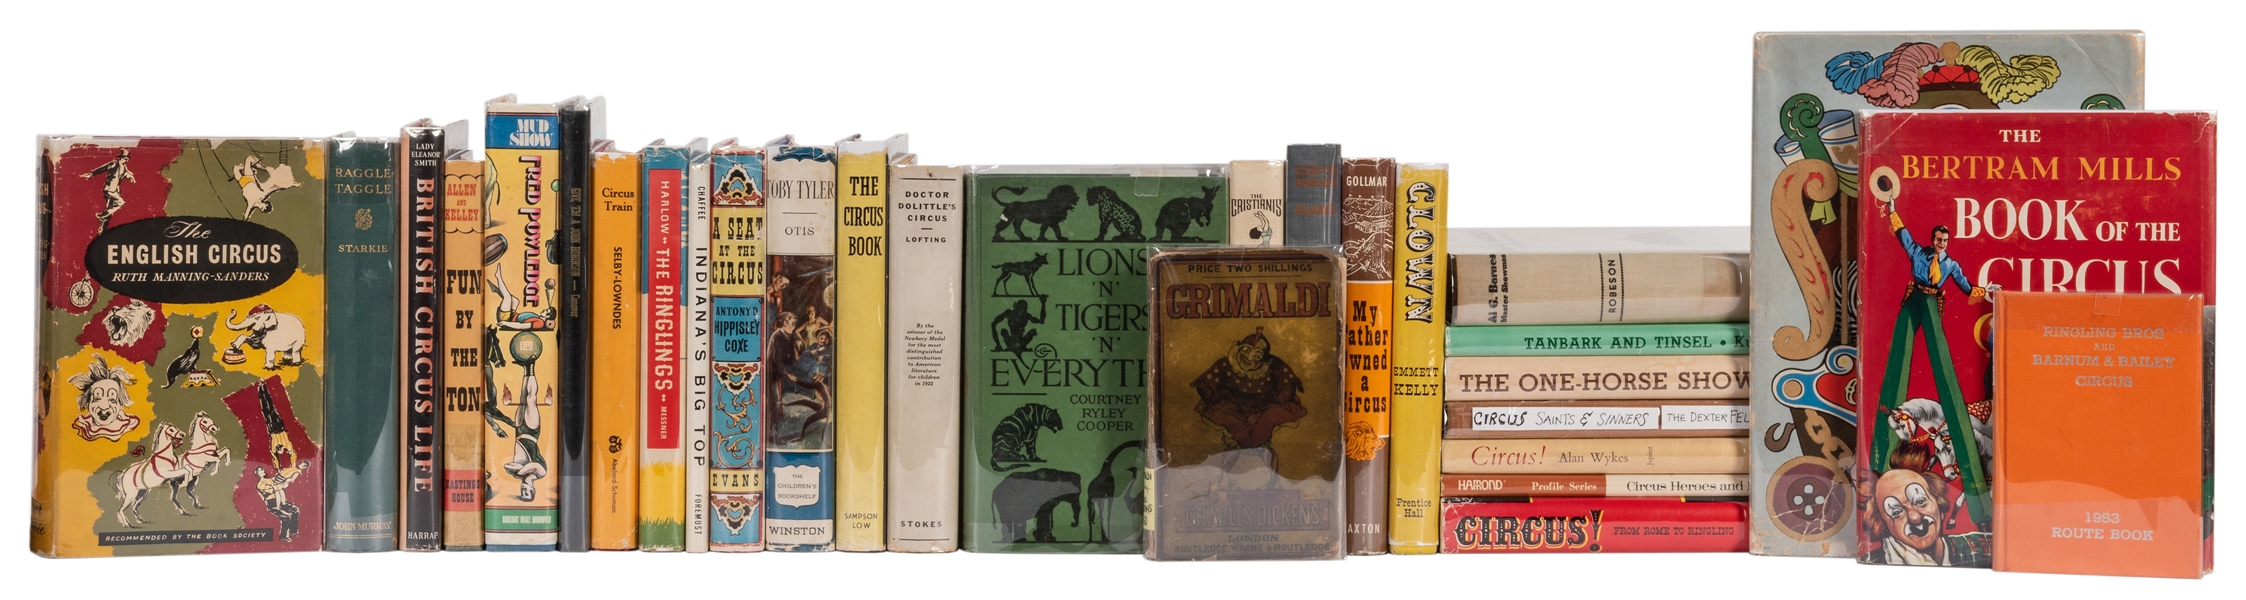 A Large Collection of Circus Related Books.